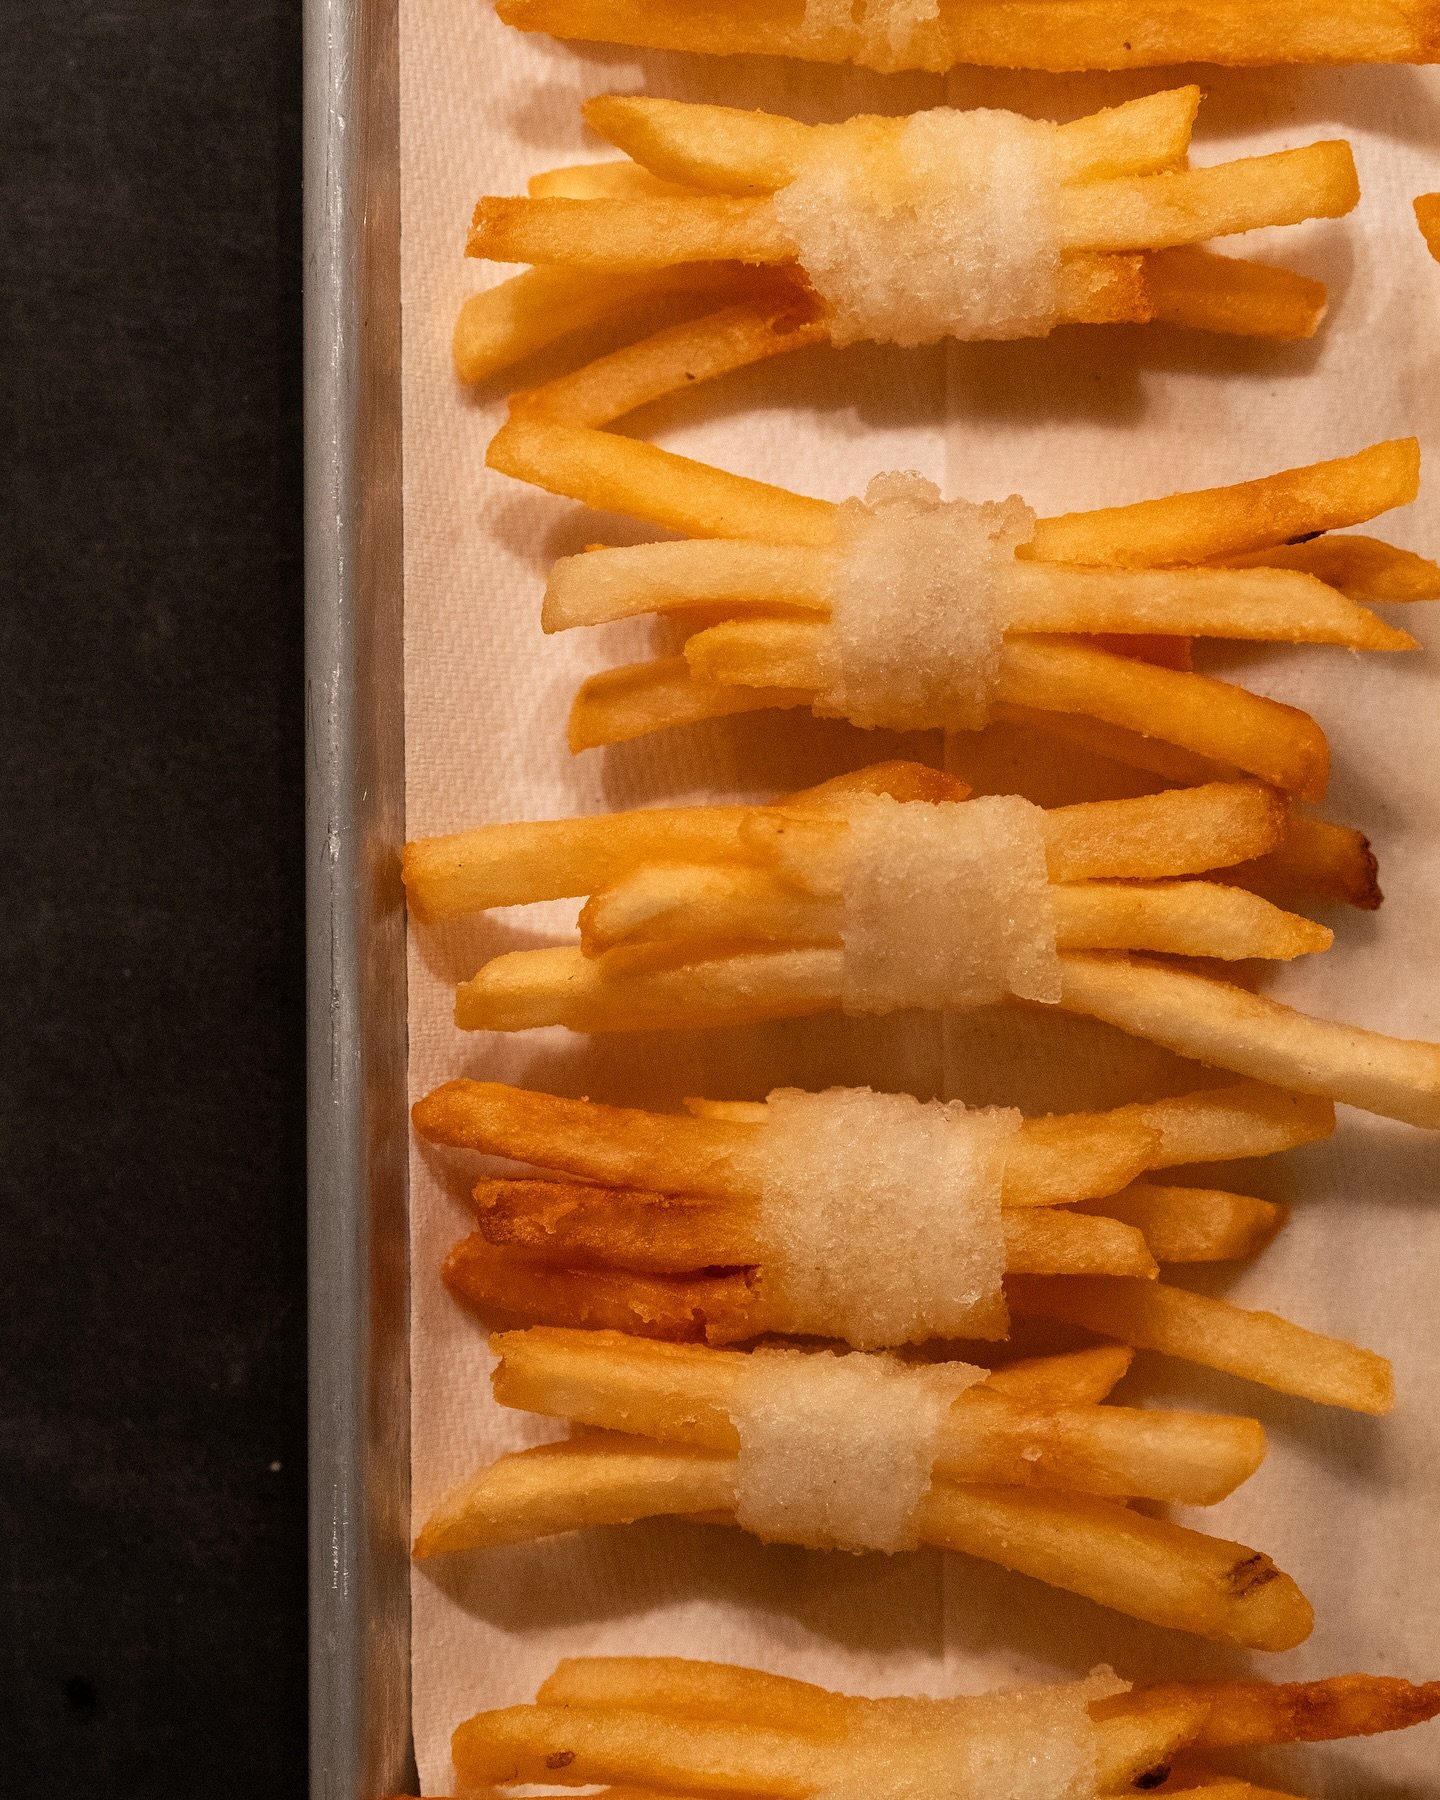 Bundled fries, ready for service.